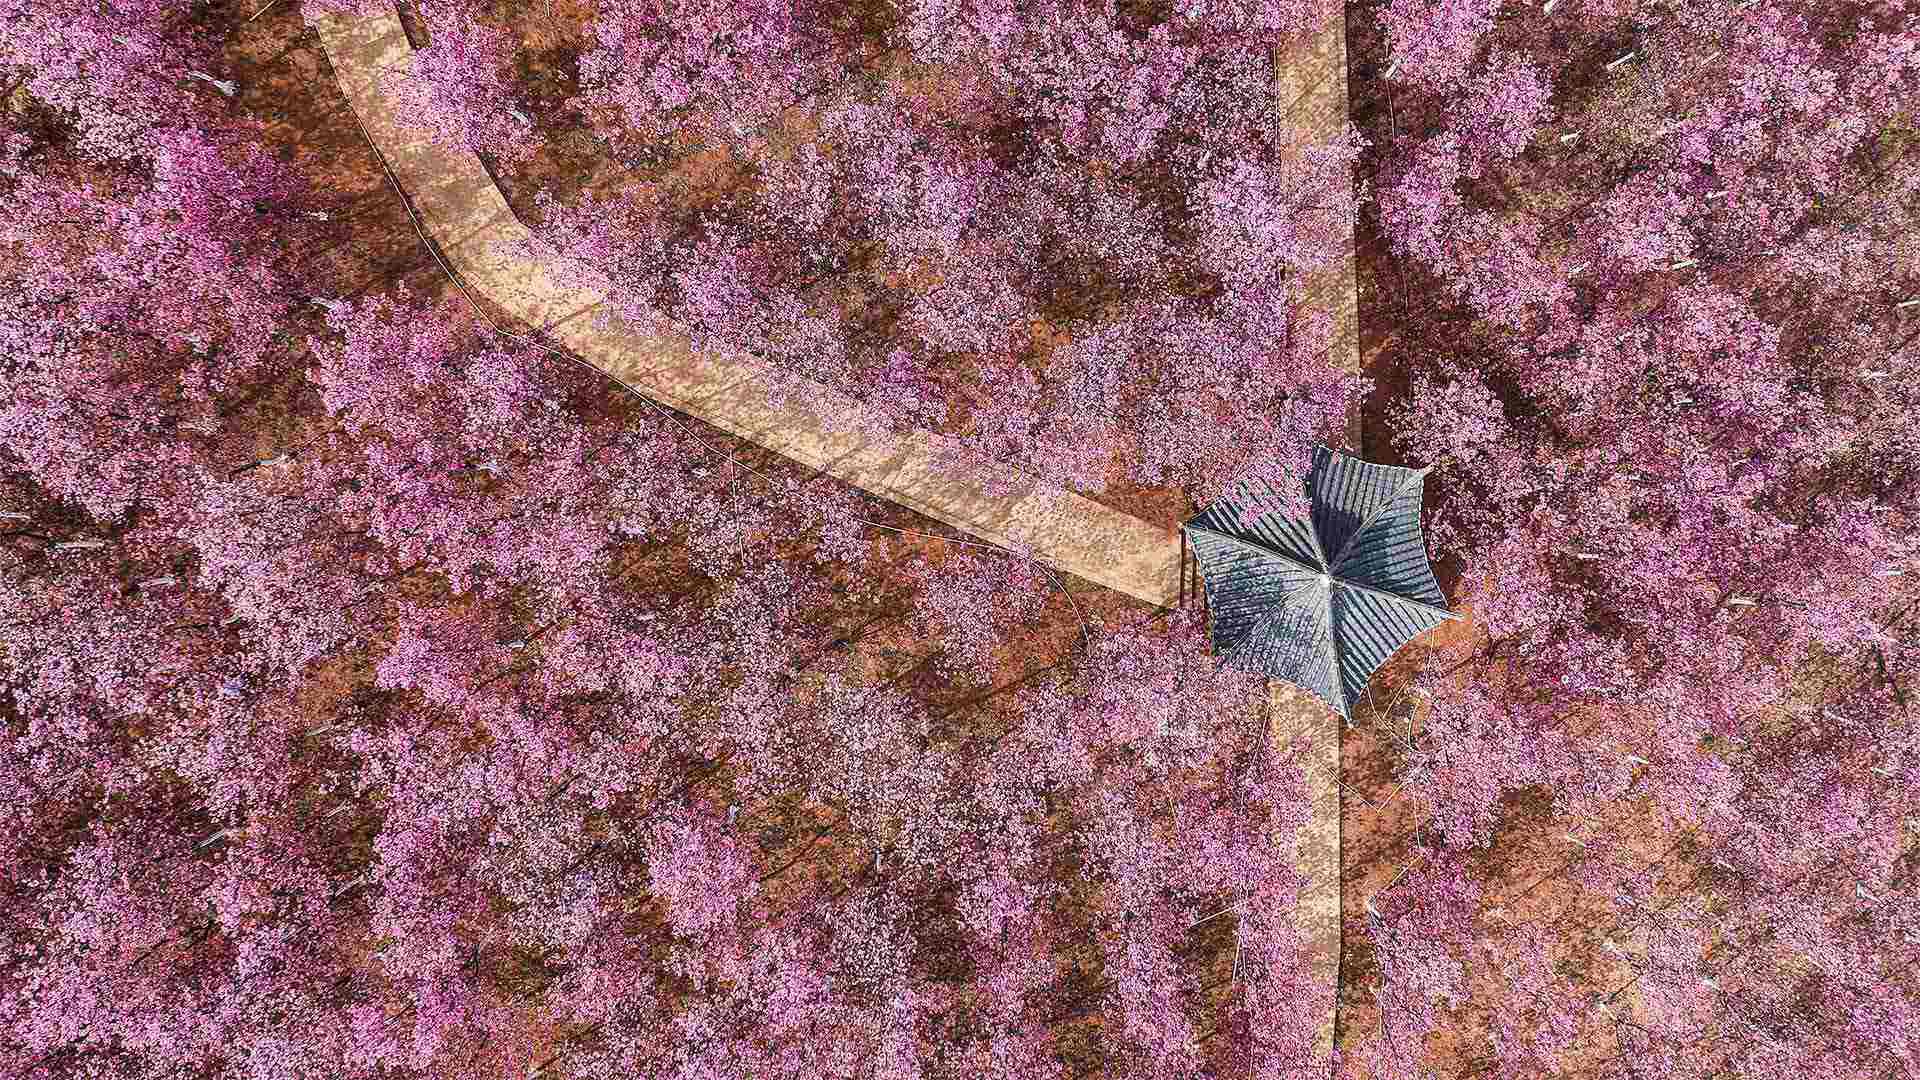 Aerial view of cherry blossom in Spring